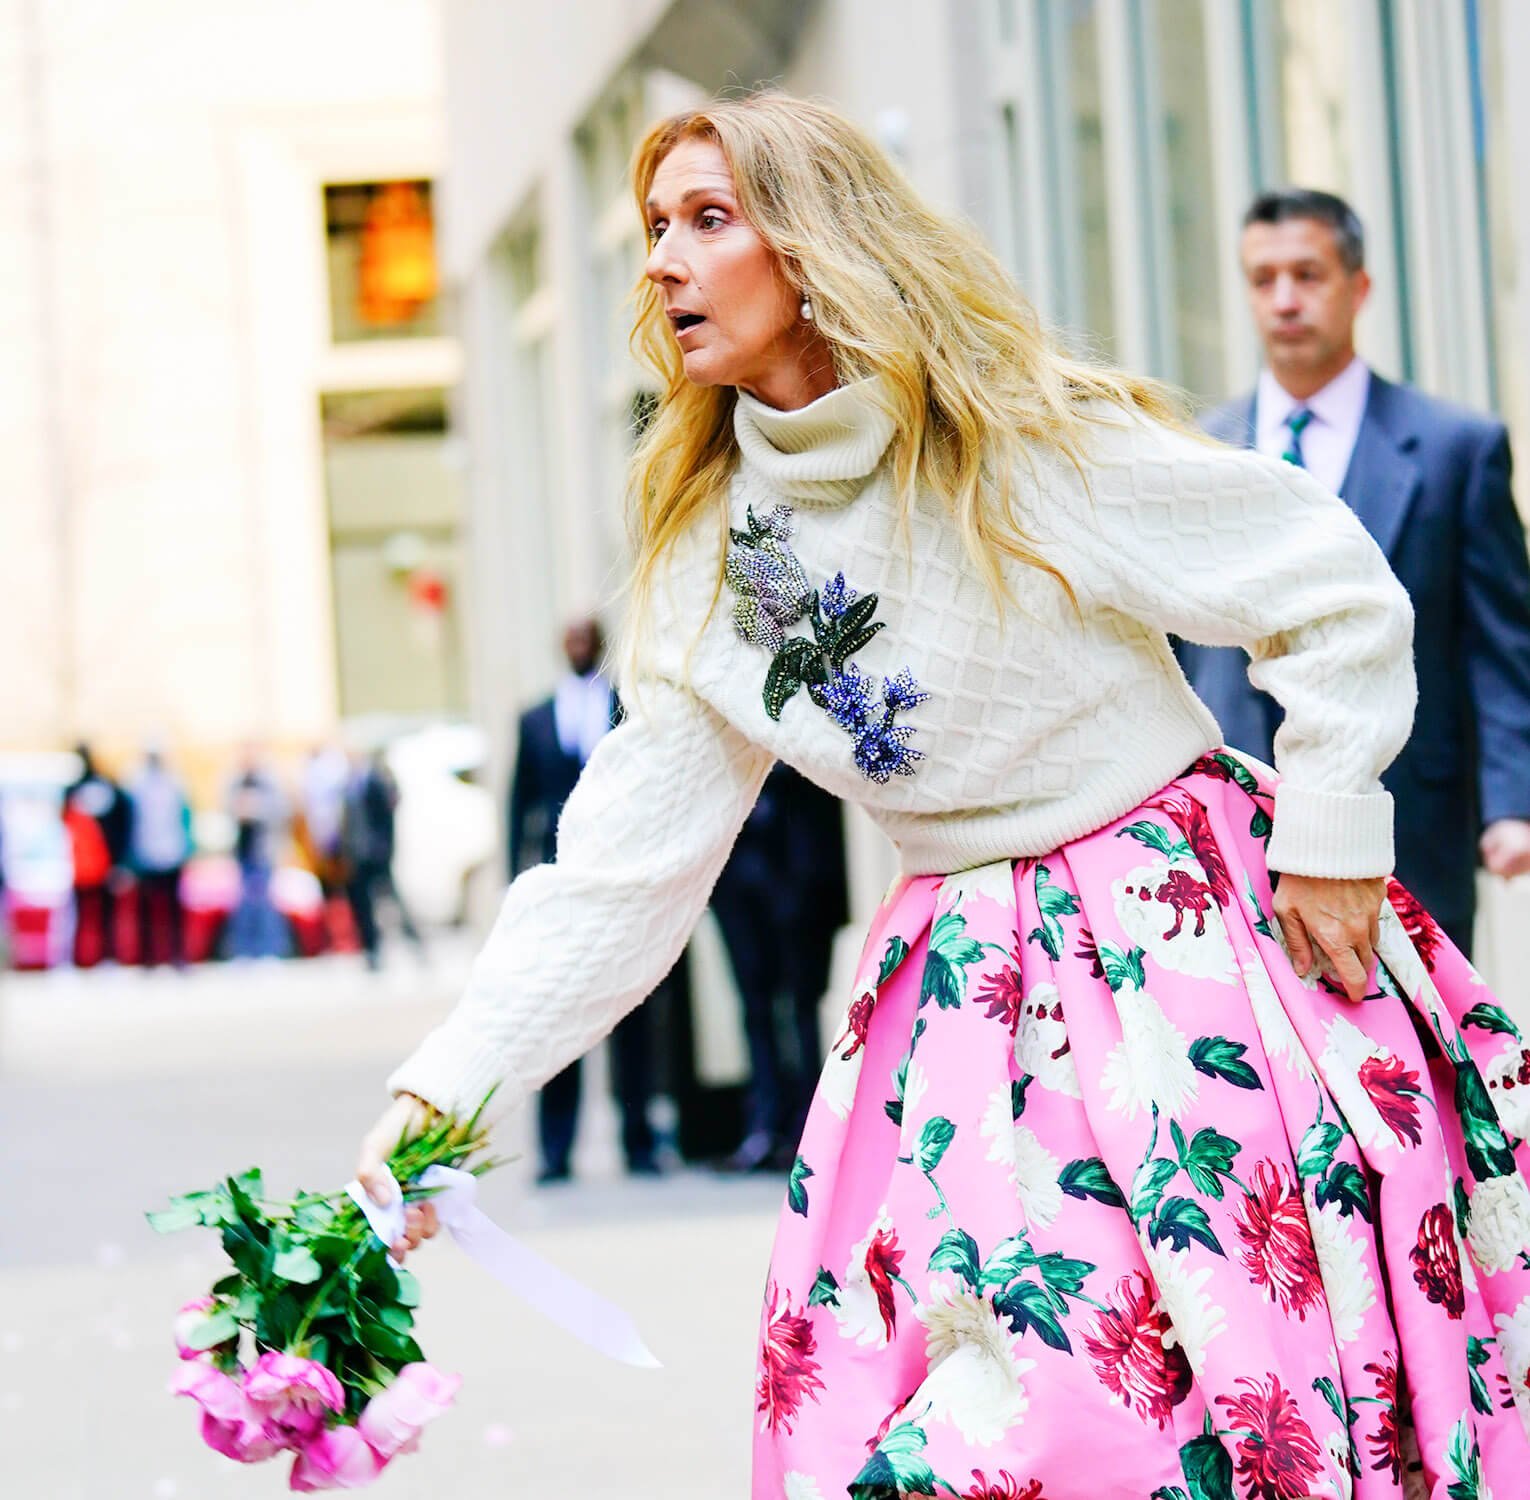 Celine Dion standing with her hand out holding roses on the street. She's wearing a white turtleneck sweater and a pink floral skirt.